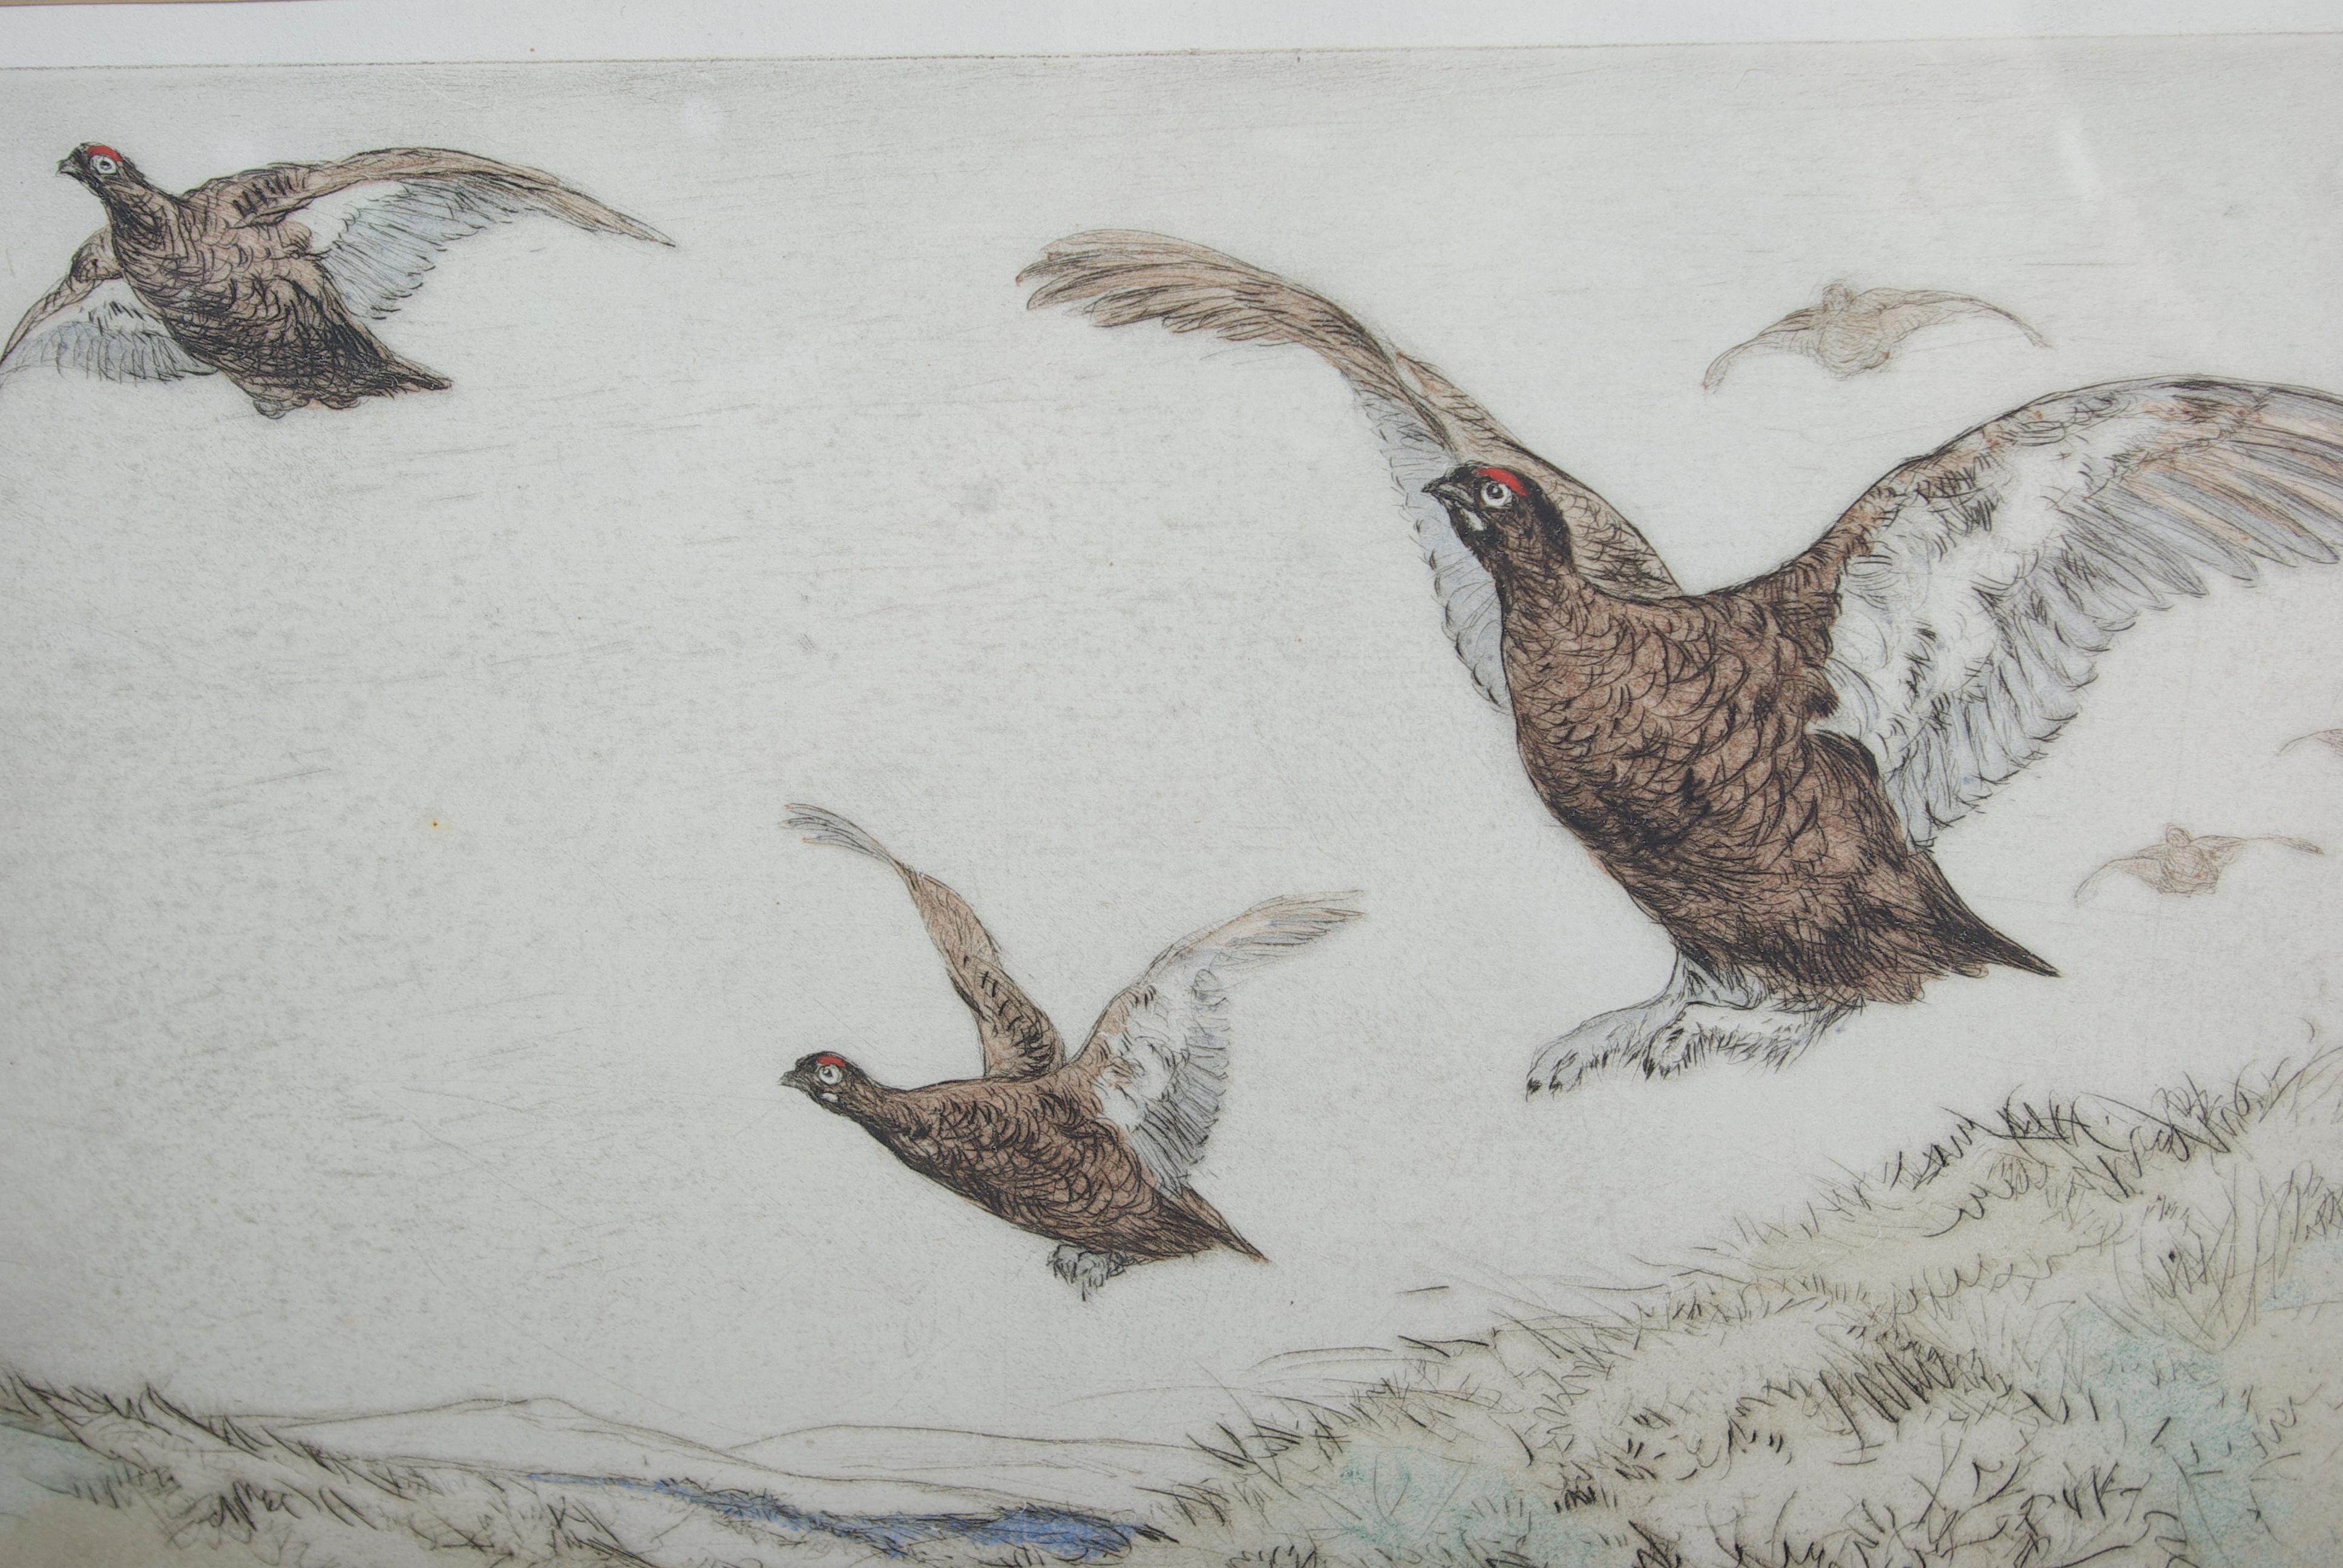 Antique bird etching, Vernon stokescolored Tinted Etching, Signed, Limited Edition, H010

Colored etching Grouse in Flight
Drawing is crisp and well observed
Original frame and glass
This is #15 of only 75 produced

$450

Measures: Frame: 19